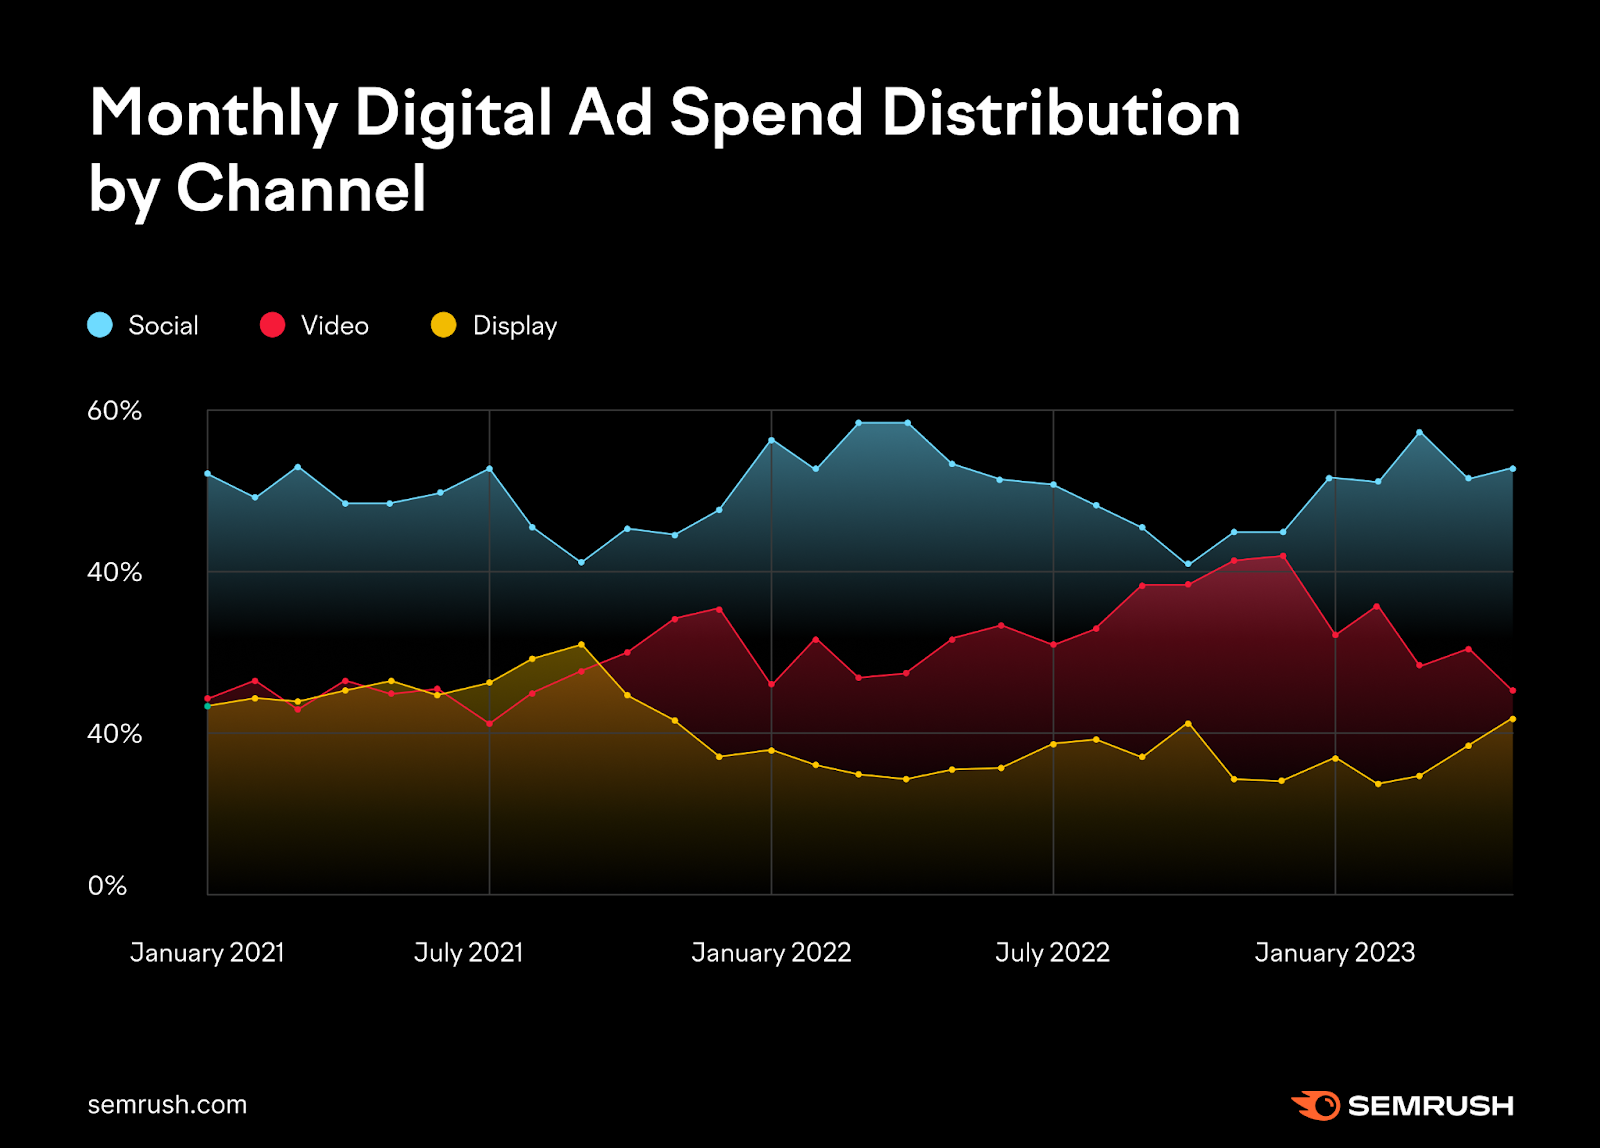 digital ad spend distribution by channel trend